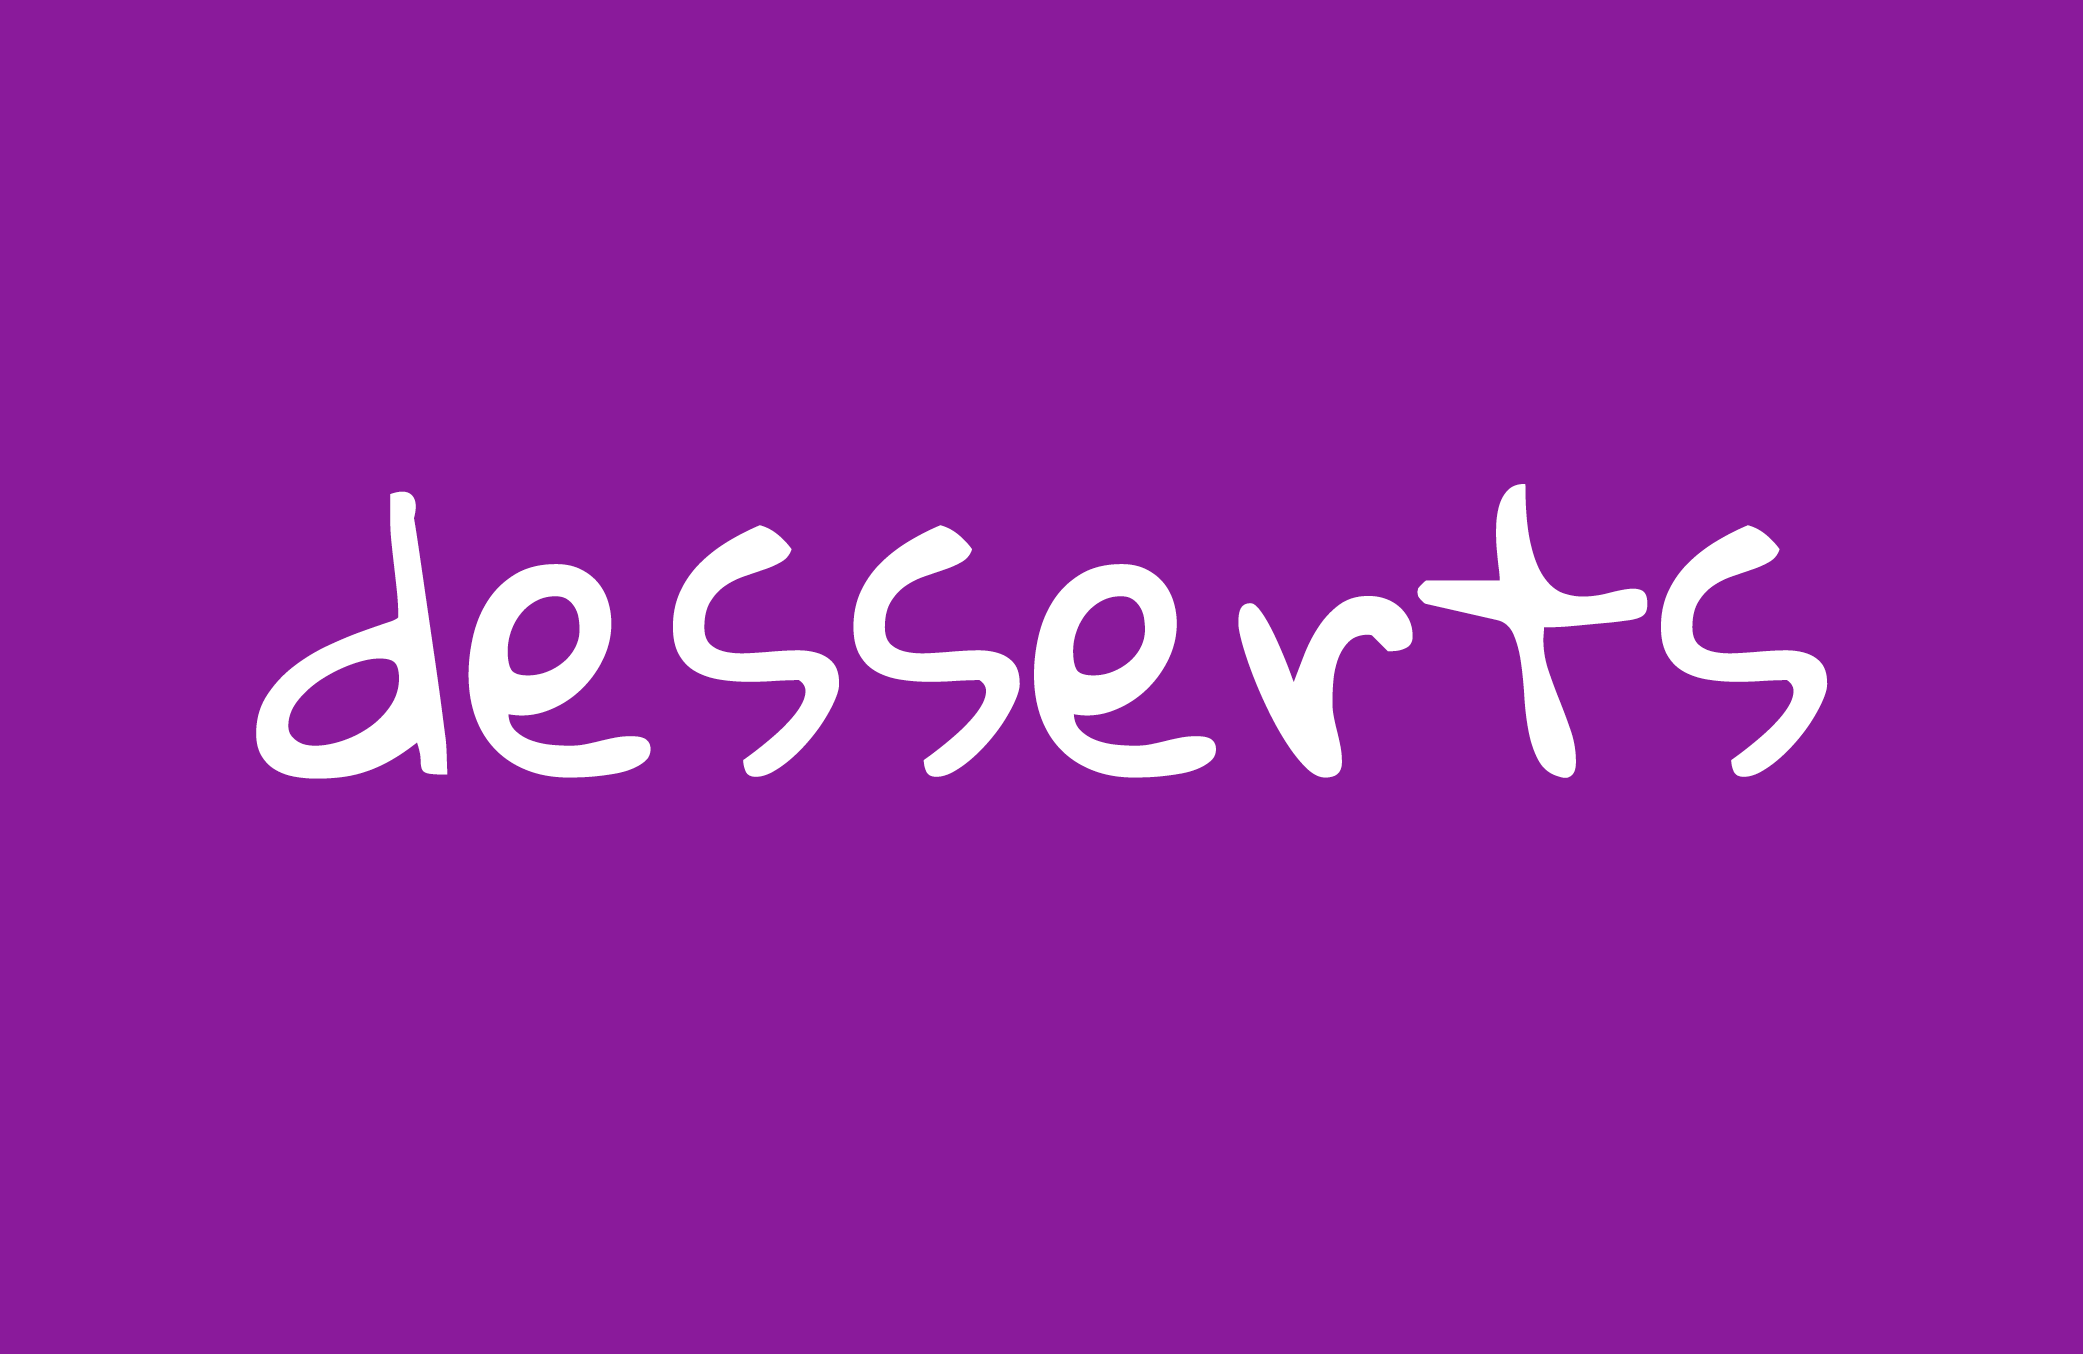 desserts.png?format=2500w